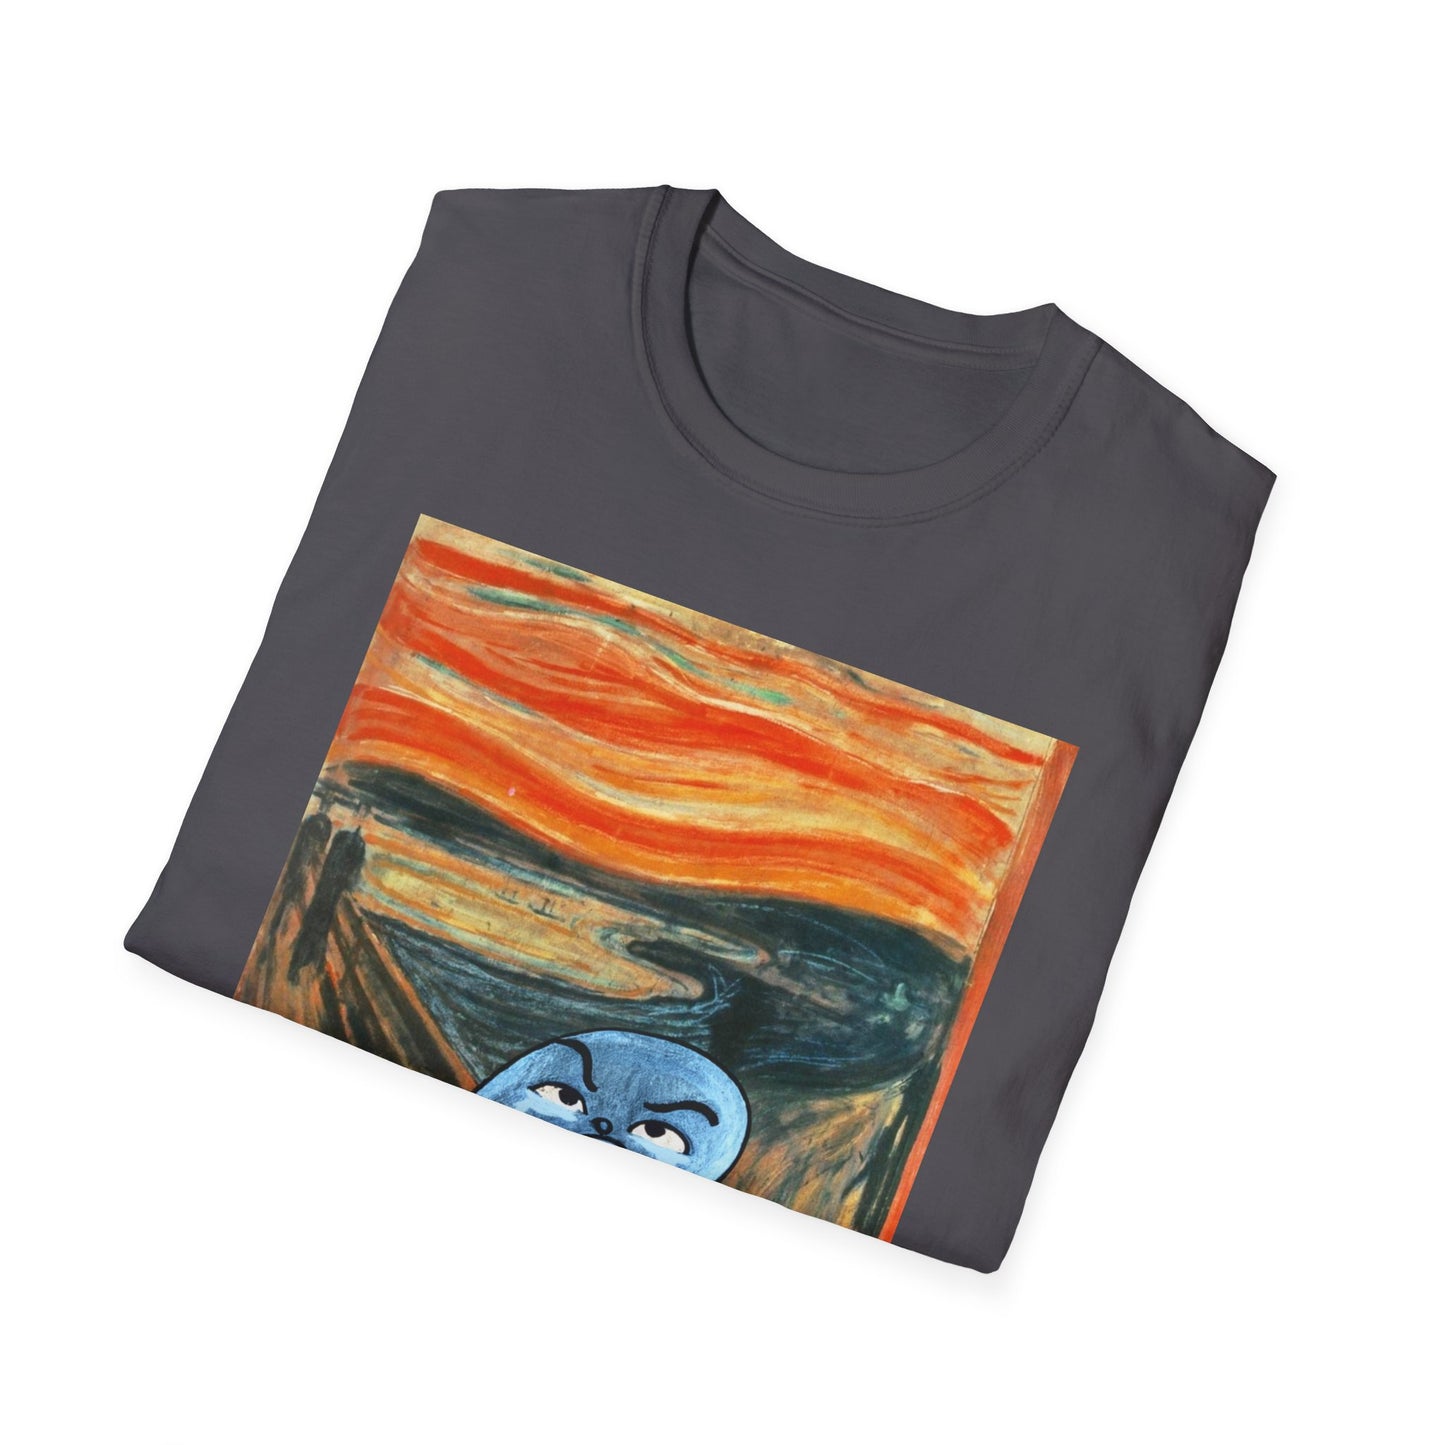 The Ugly Smell Scream t-shirt